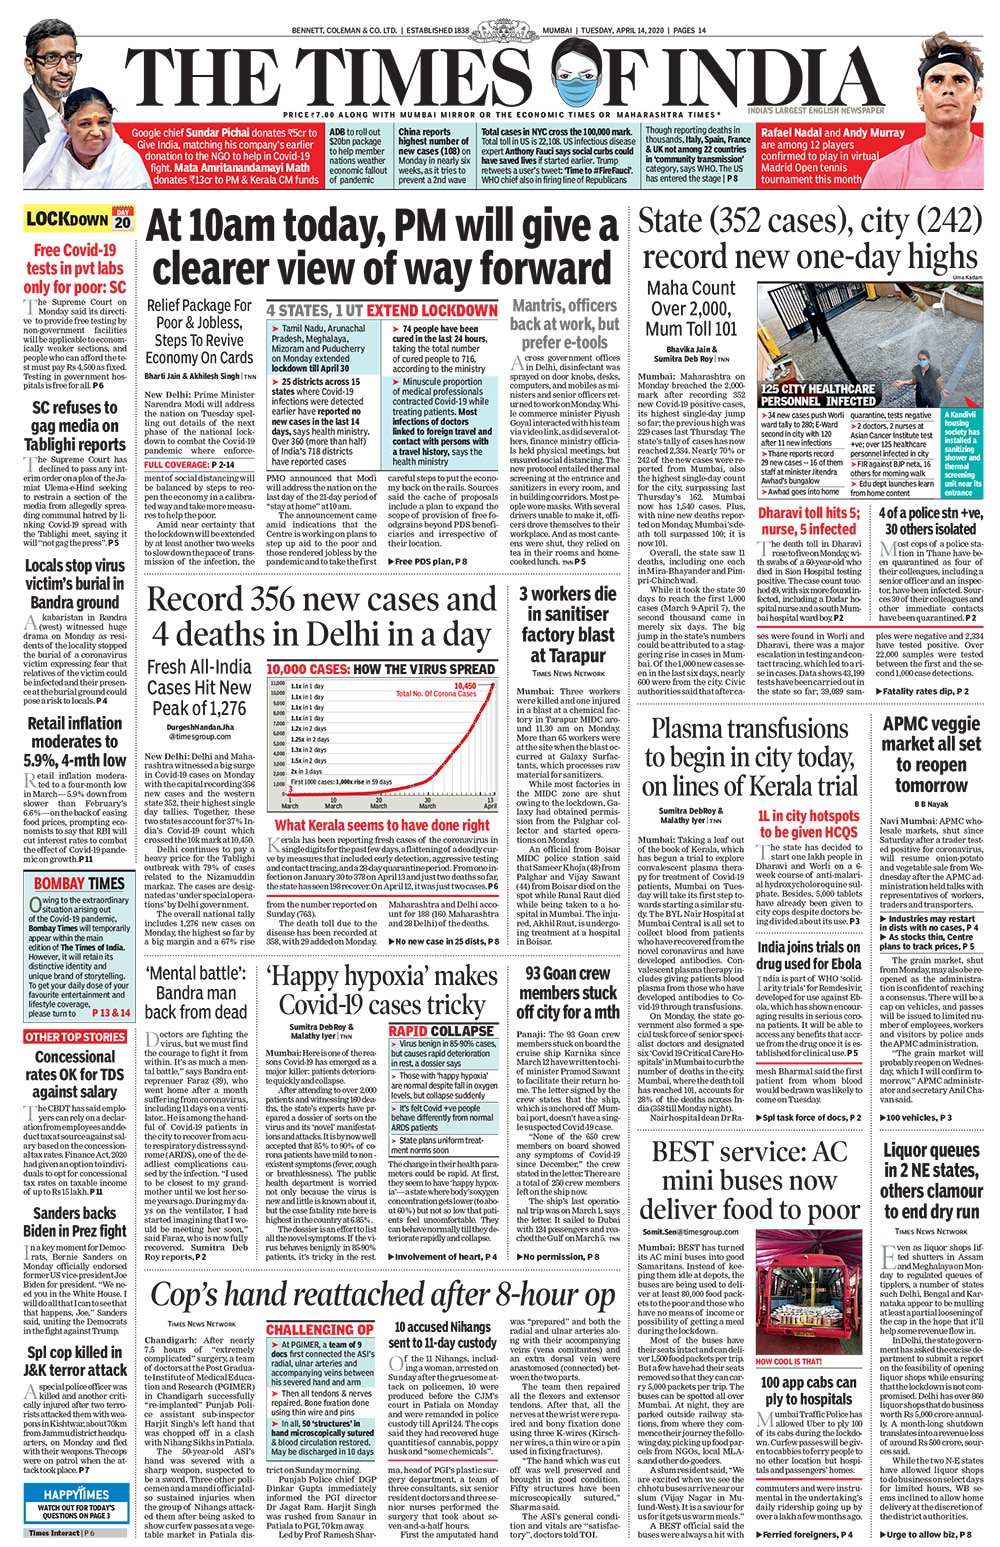 Newspaper Headlines: PM Modi To Address Nation Today At 10 am & Other Top Stories